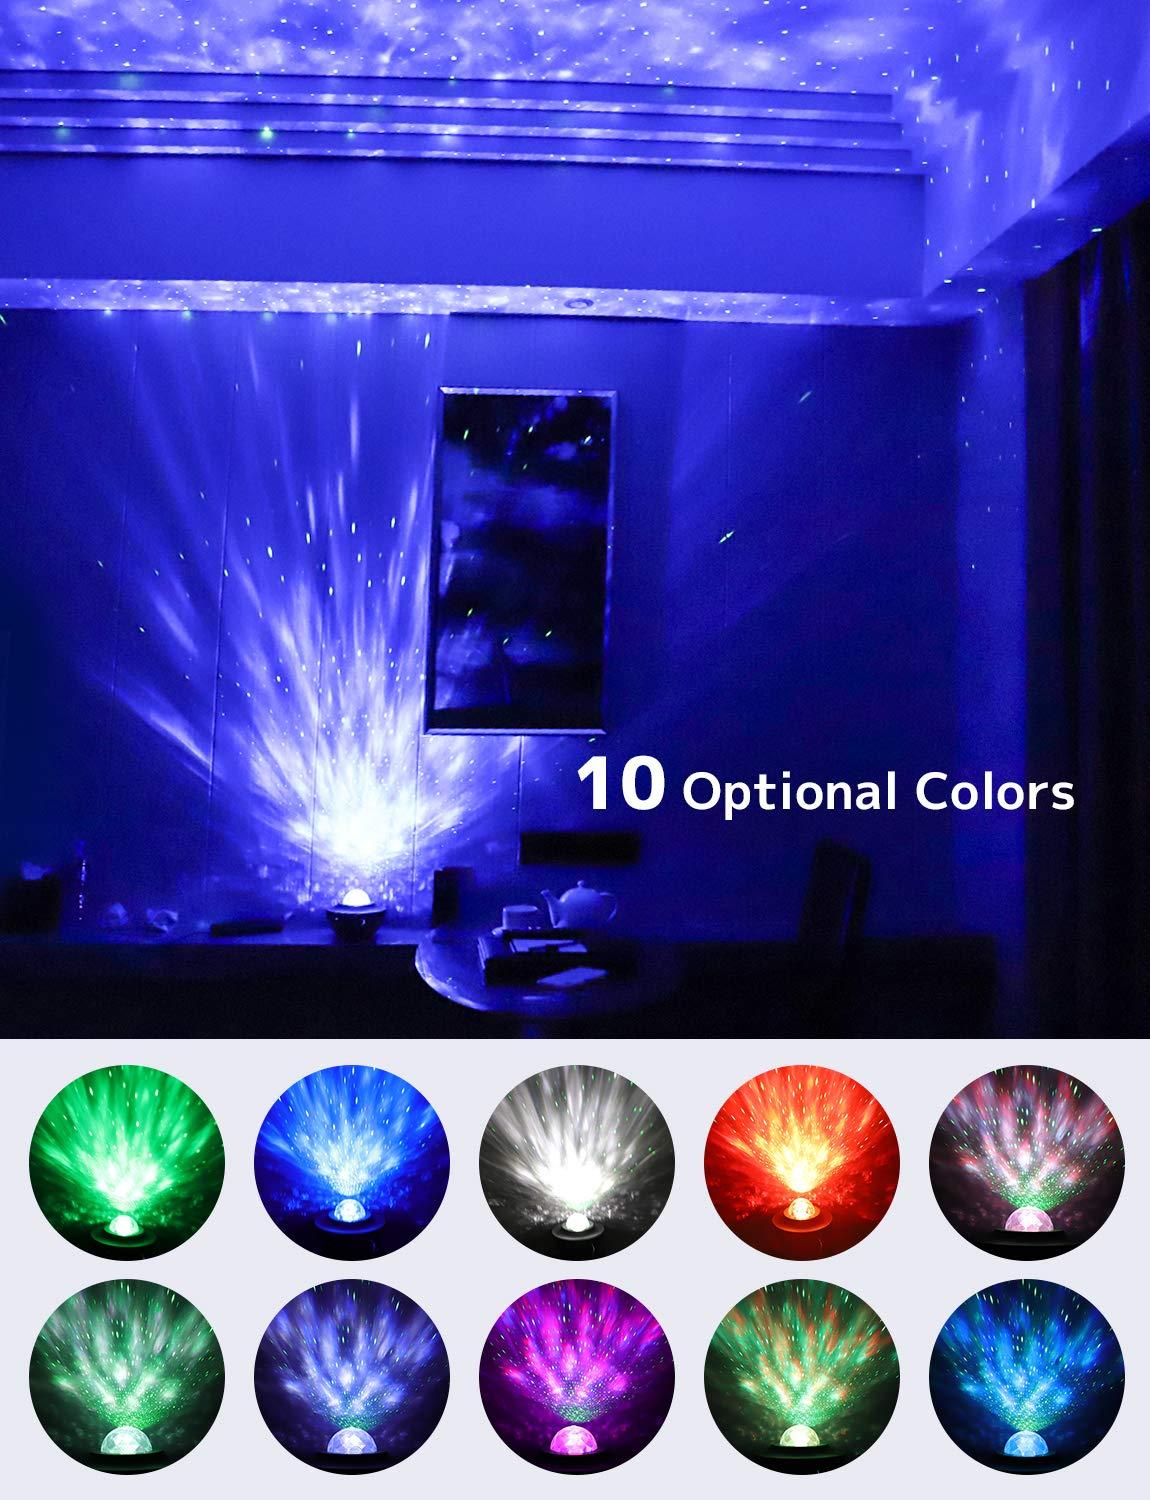 Colorful Music Player Romantic LED Night Light  Starry Sky Projector Blueteeth USB Voice ControlProjection Lamp Birthday Gift-2